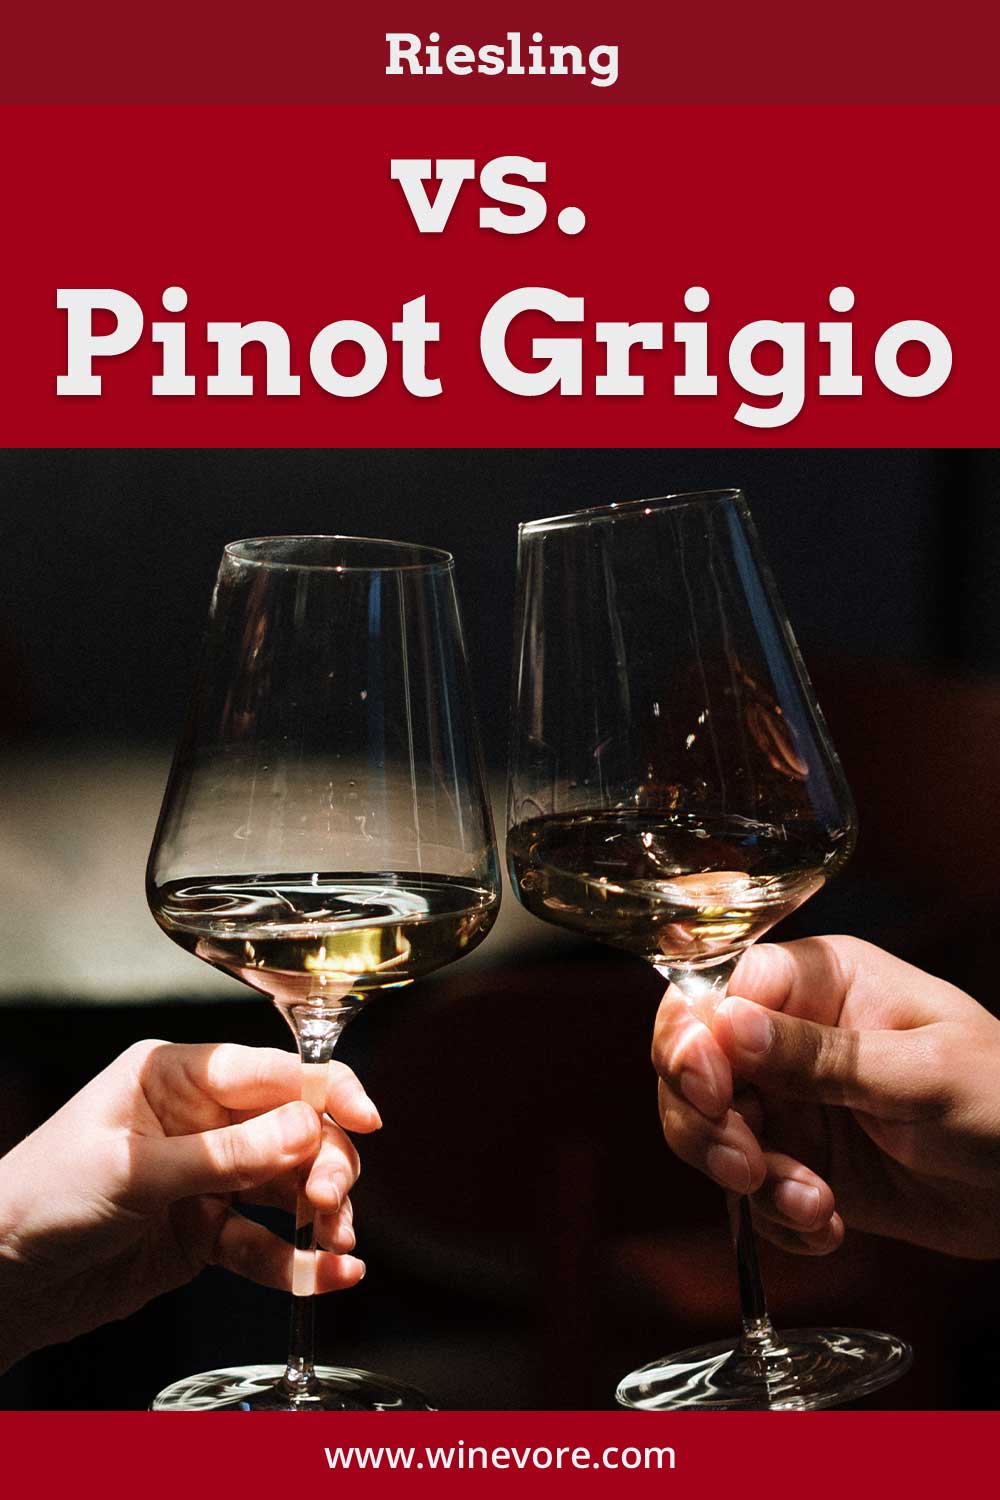 Man and woman's hand clinking wine glasses - Riesling vs. Pinot Grigio.